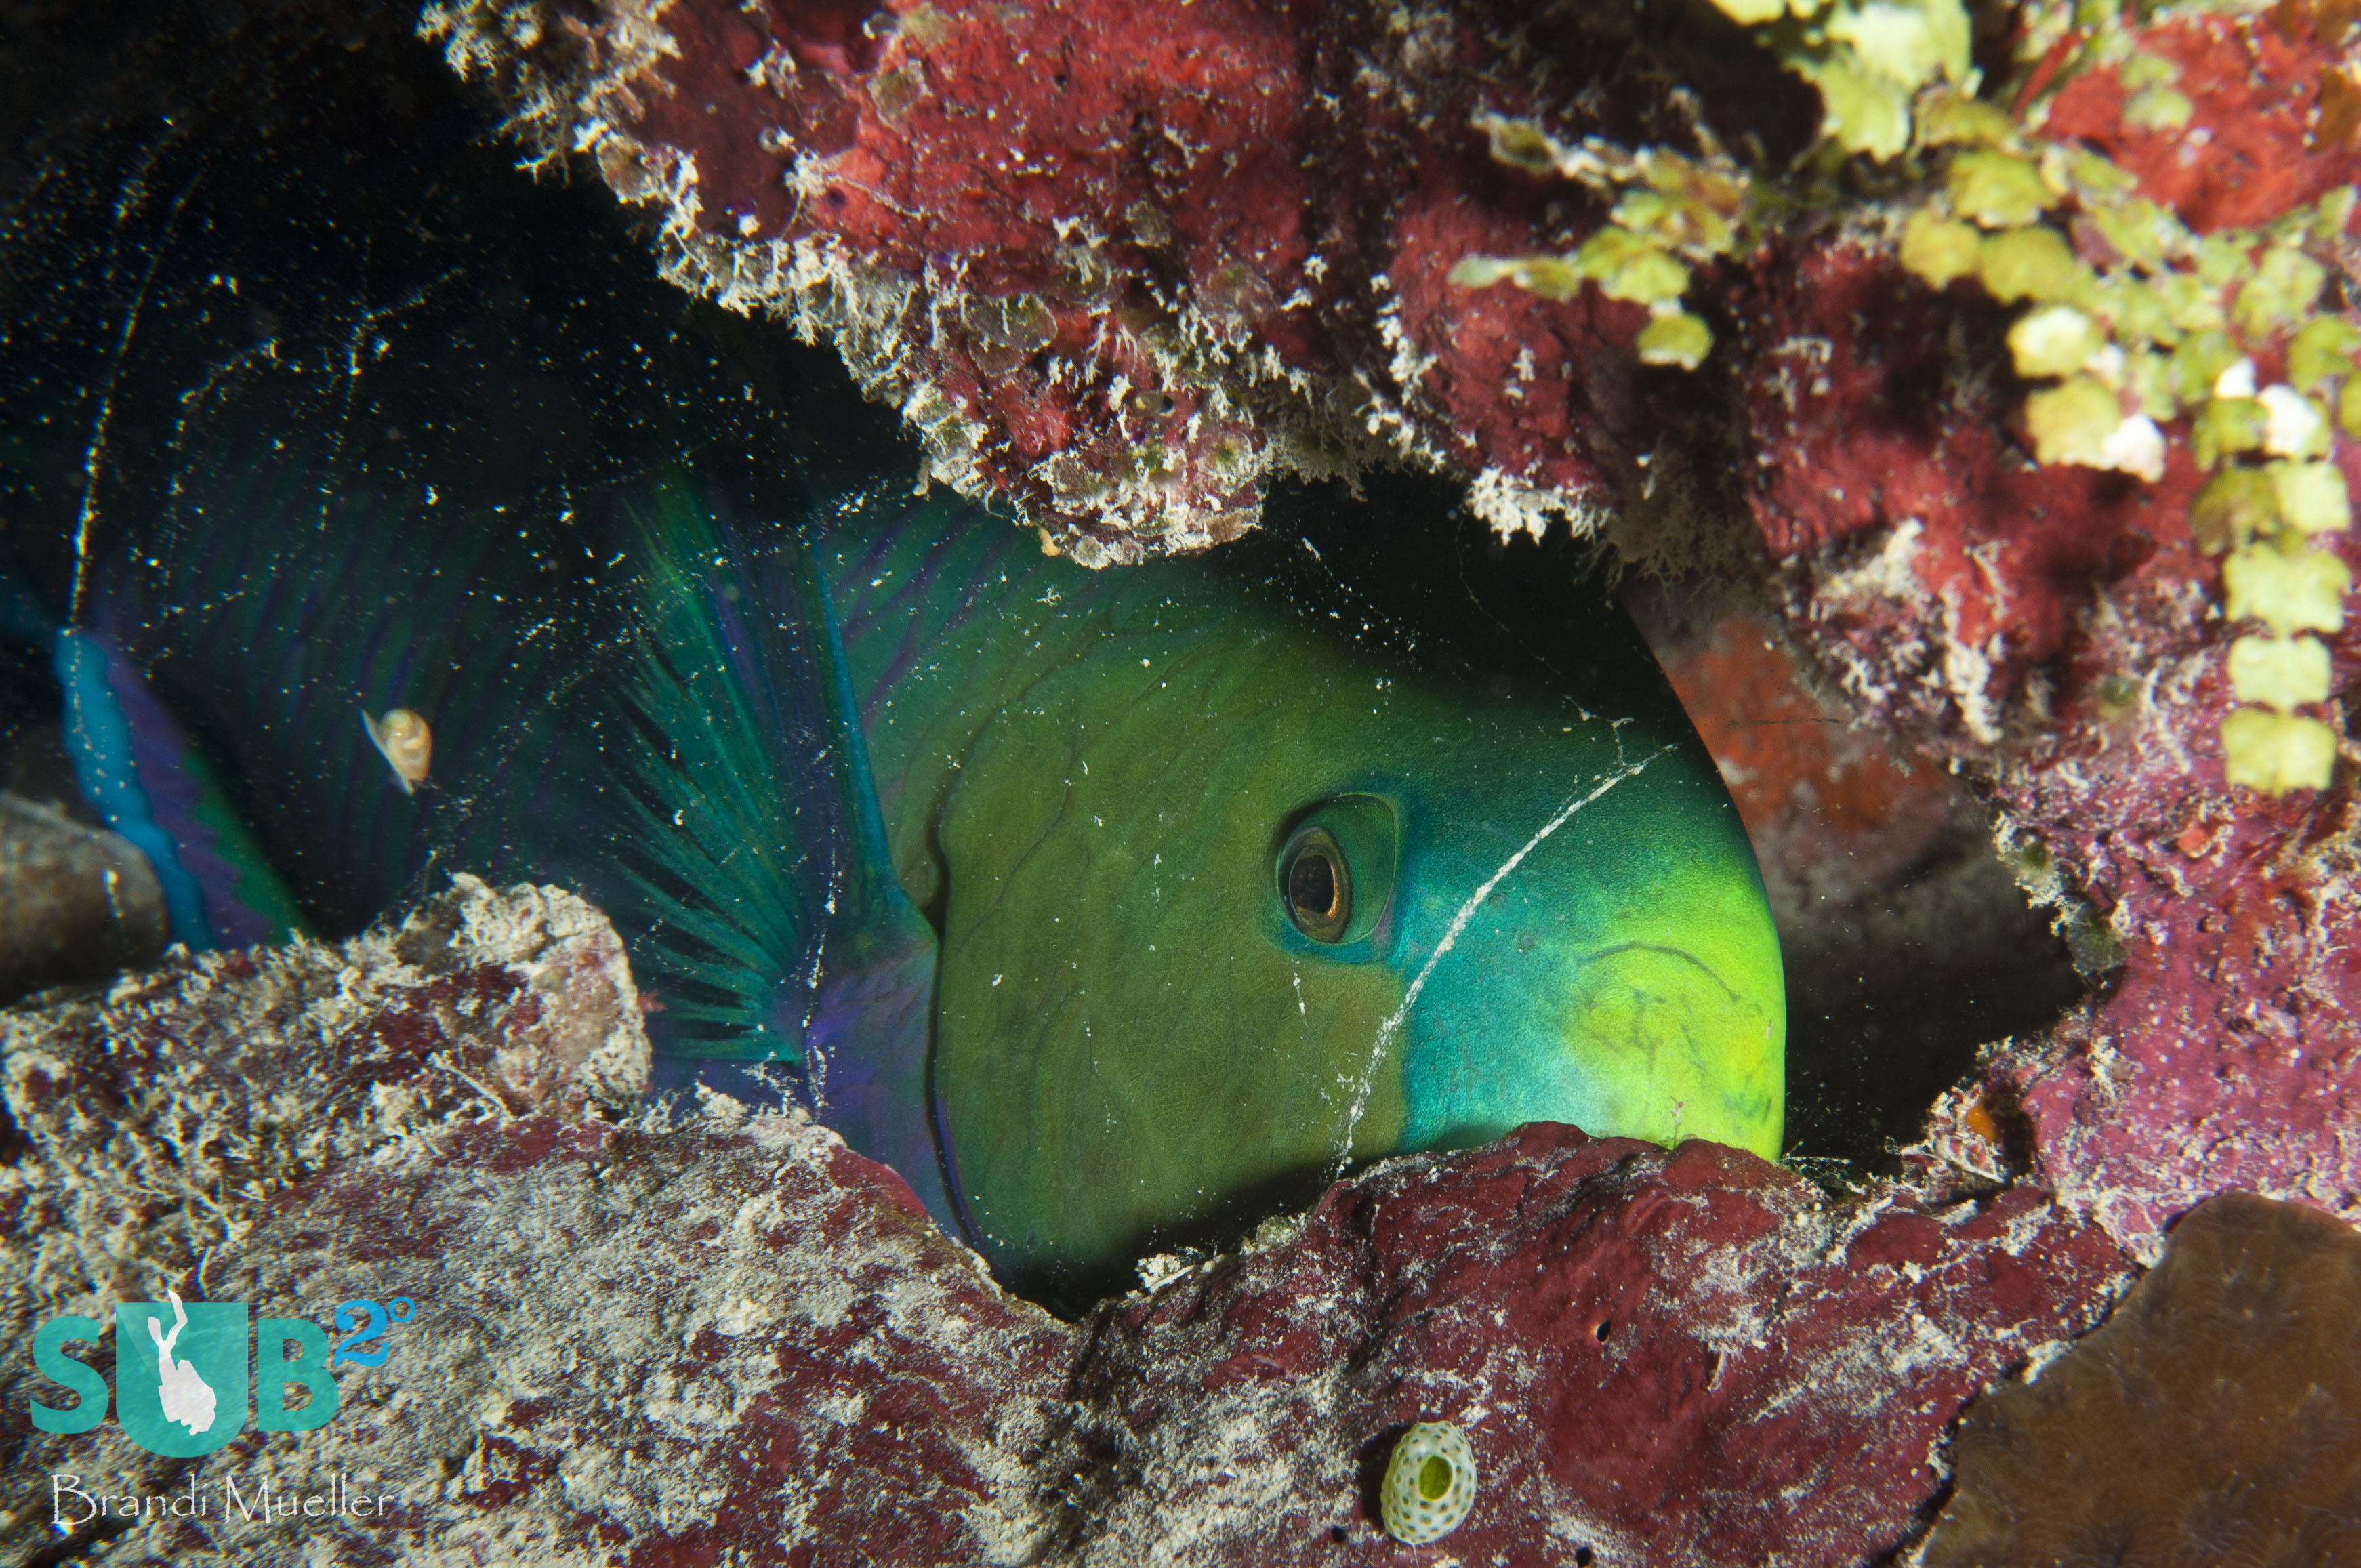 Tucked in for the night, this parrotfish has produced a mucus bubble around its body to protect it from predators during the night. The bubble hides its scent and will awaken the parrotfish if popped.